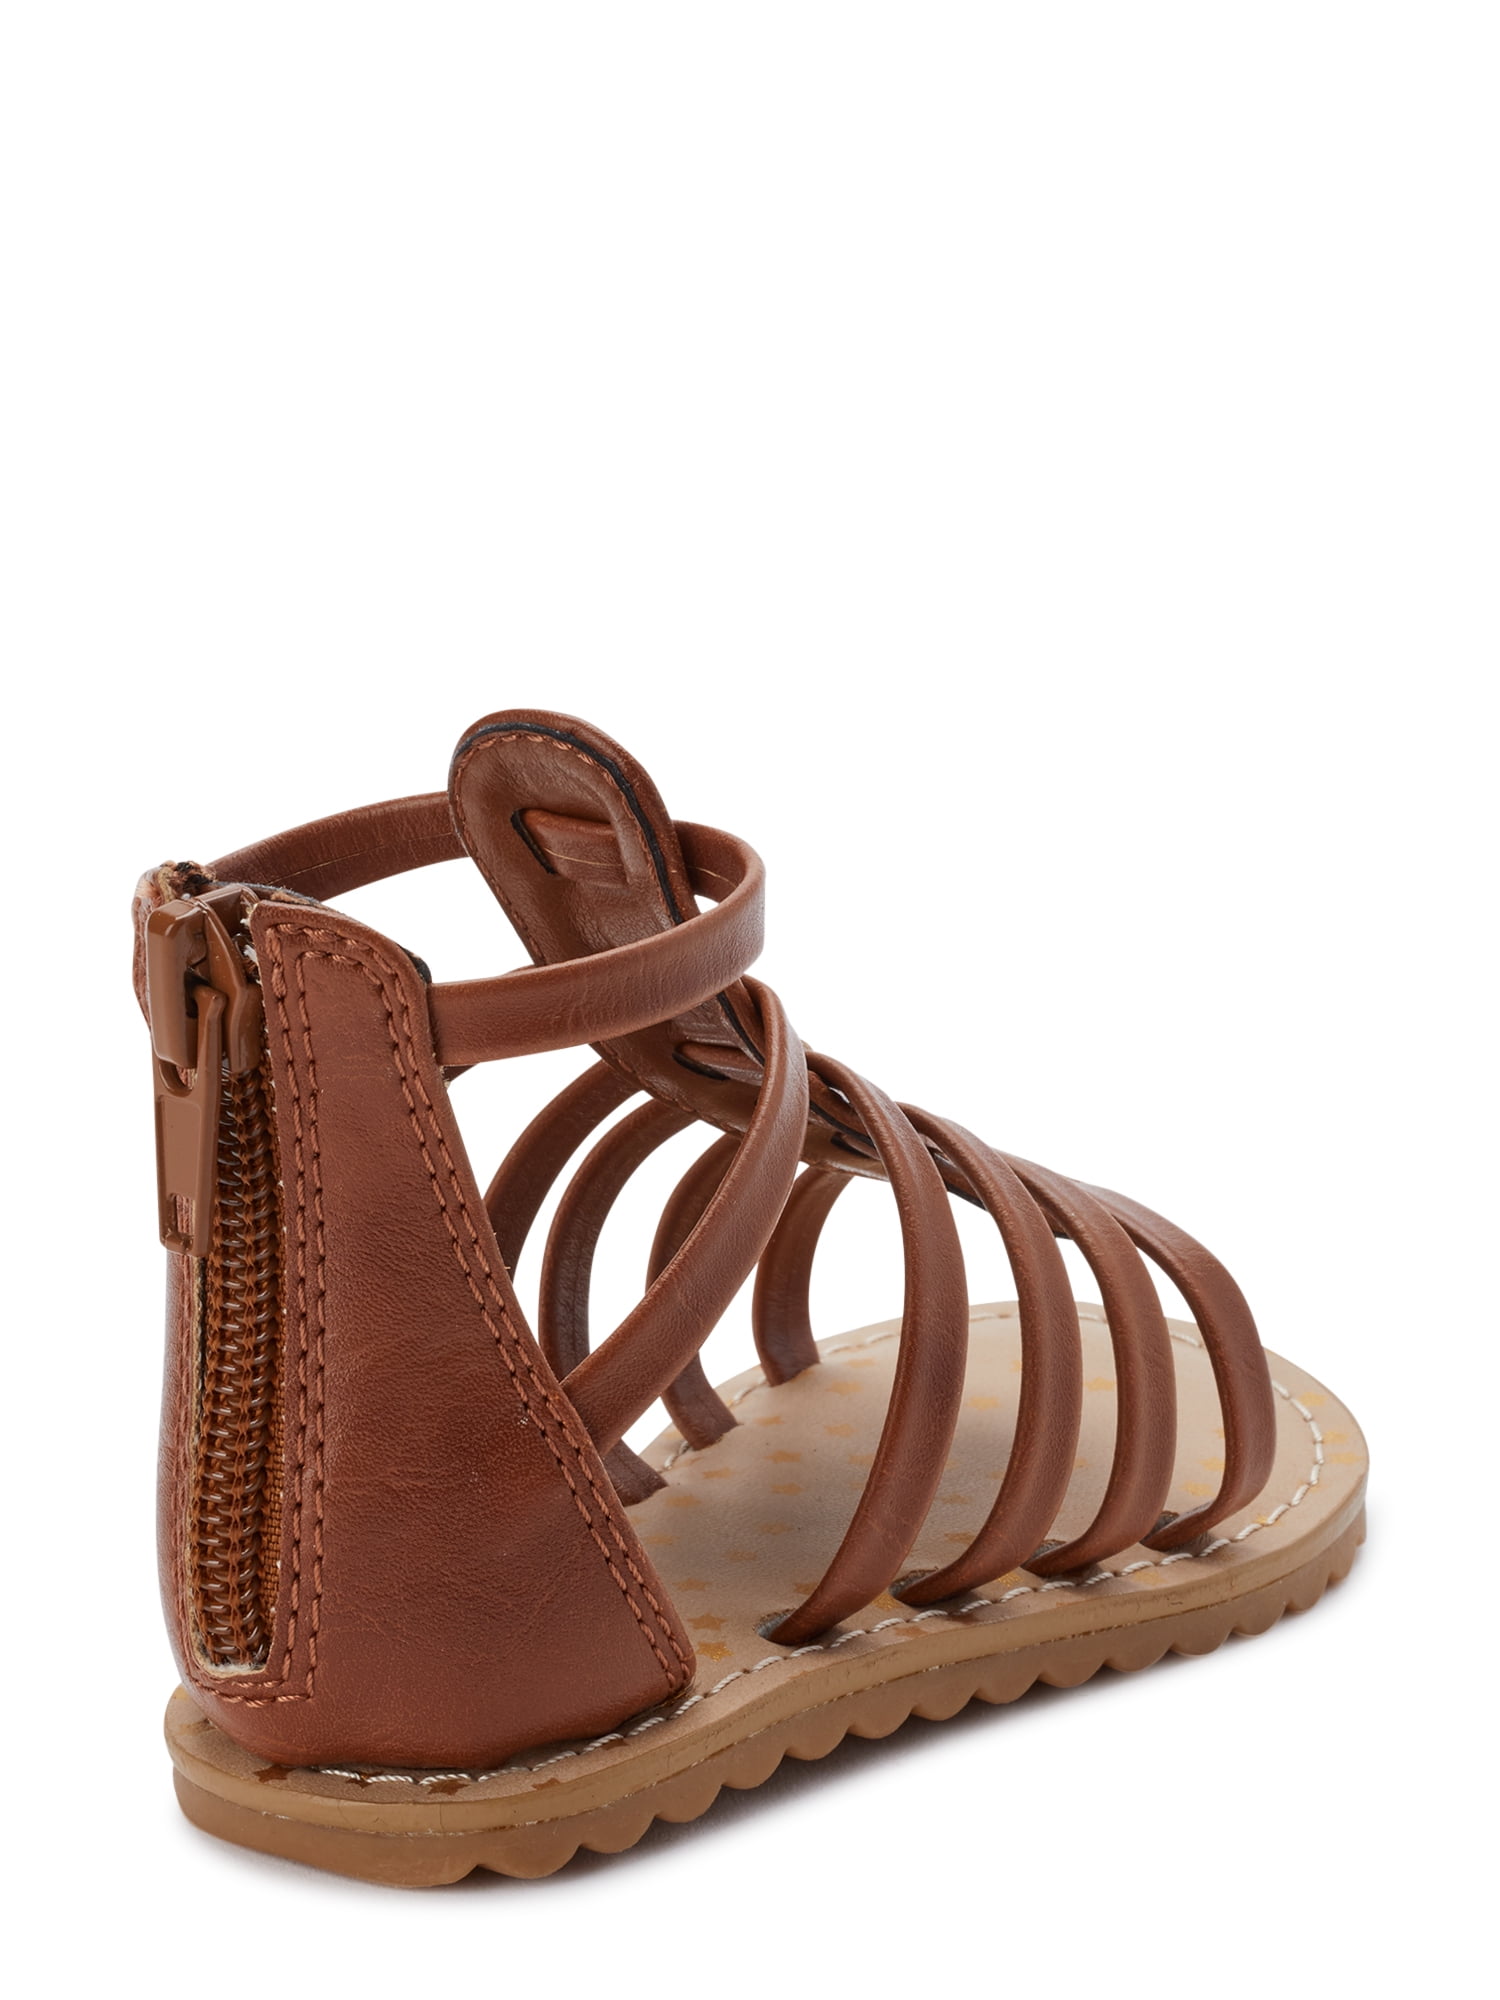 Amazon.com | bebe Toddler Girls? Sandals ? Leatherette Studded Gladiator  Sandals with Ankle Zipper (Toddler/Girl), Size 5 Toddler, Tan | Sandals